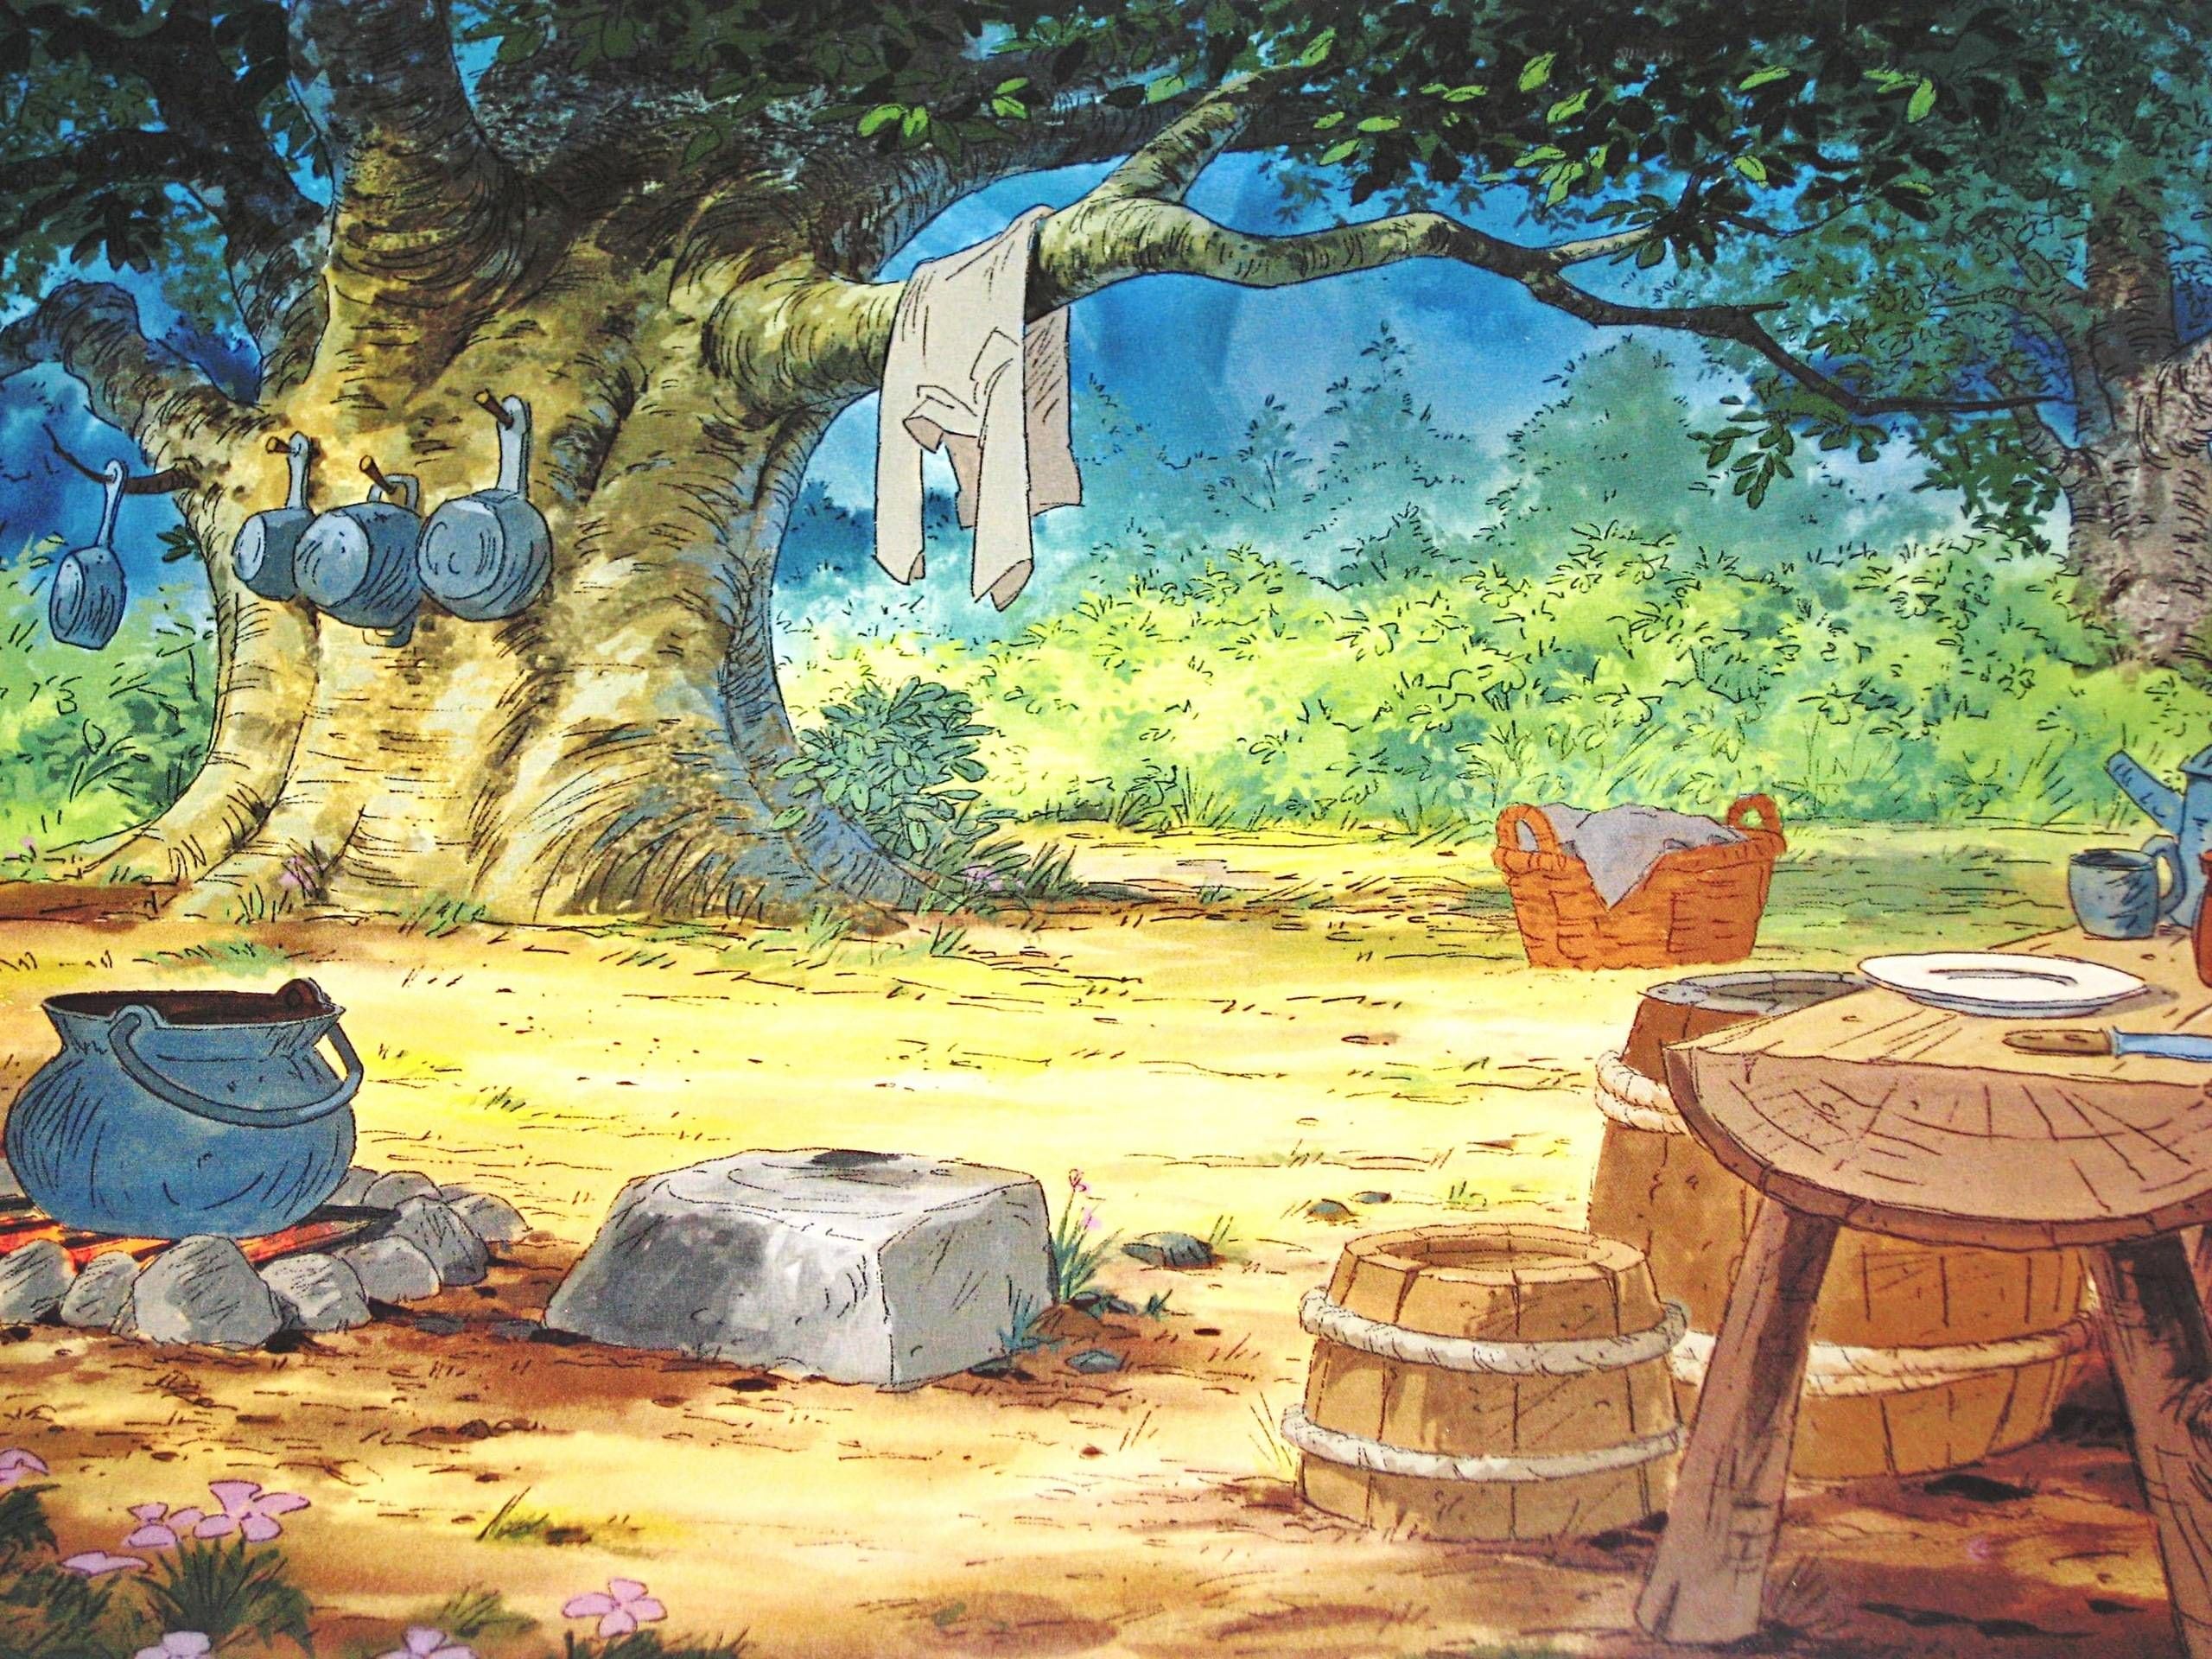 Robin Hood 1973 Backgrounds in Murder At Malone Manor inspiration post by Matt McDyre